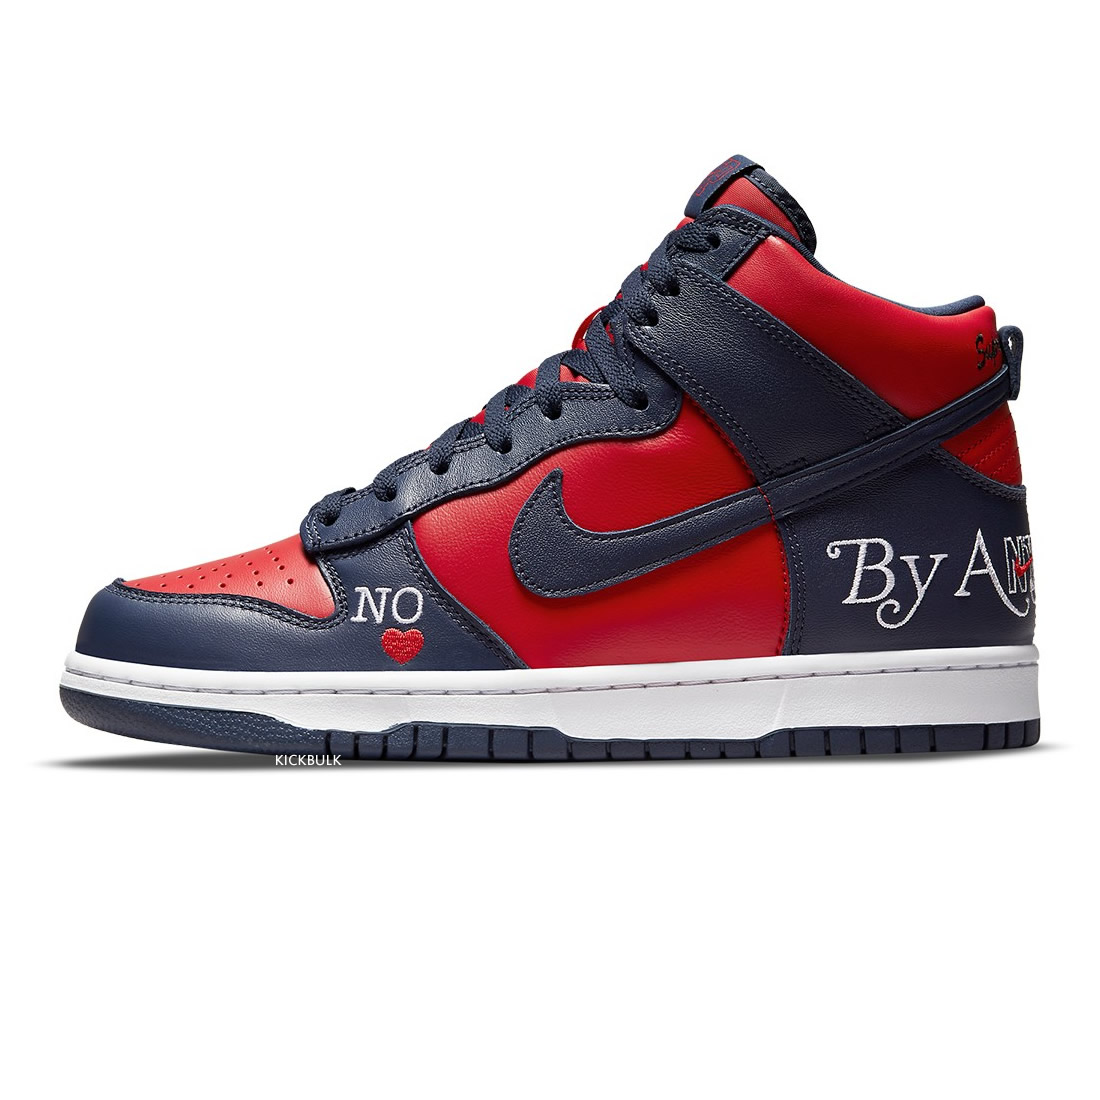 Supreme Nike Dunk High Sb By Any Means Red Navy Dn3741 600 1 - www.kickbulk.co